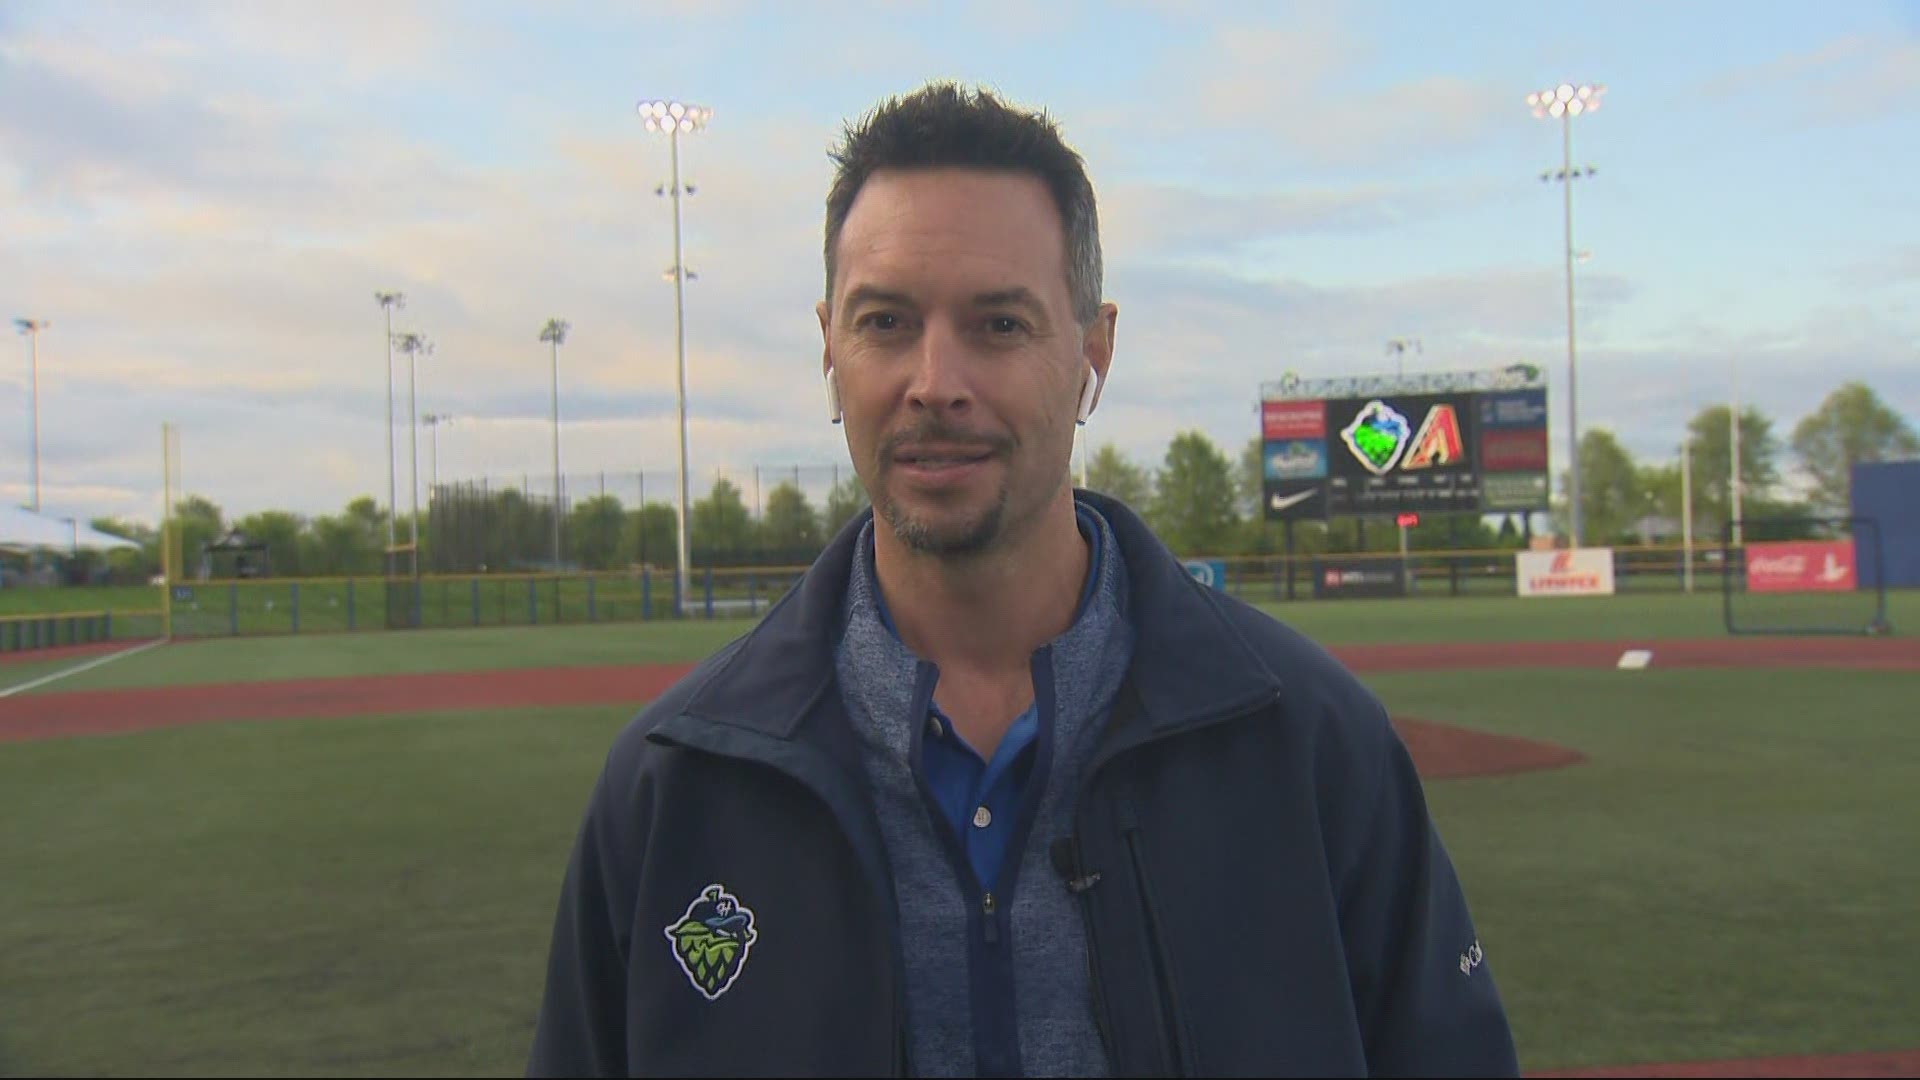 Hillsboro Hops general manager K.L. Wombacher spoke about the team's opener in front of fans and the impact if Washington County moves to extreme risk.